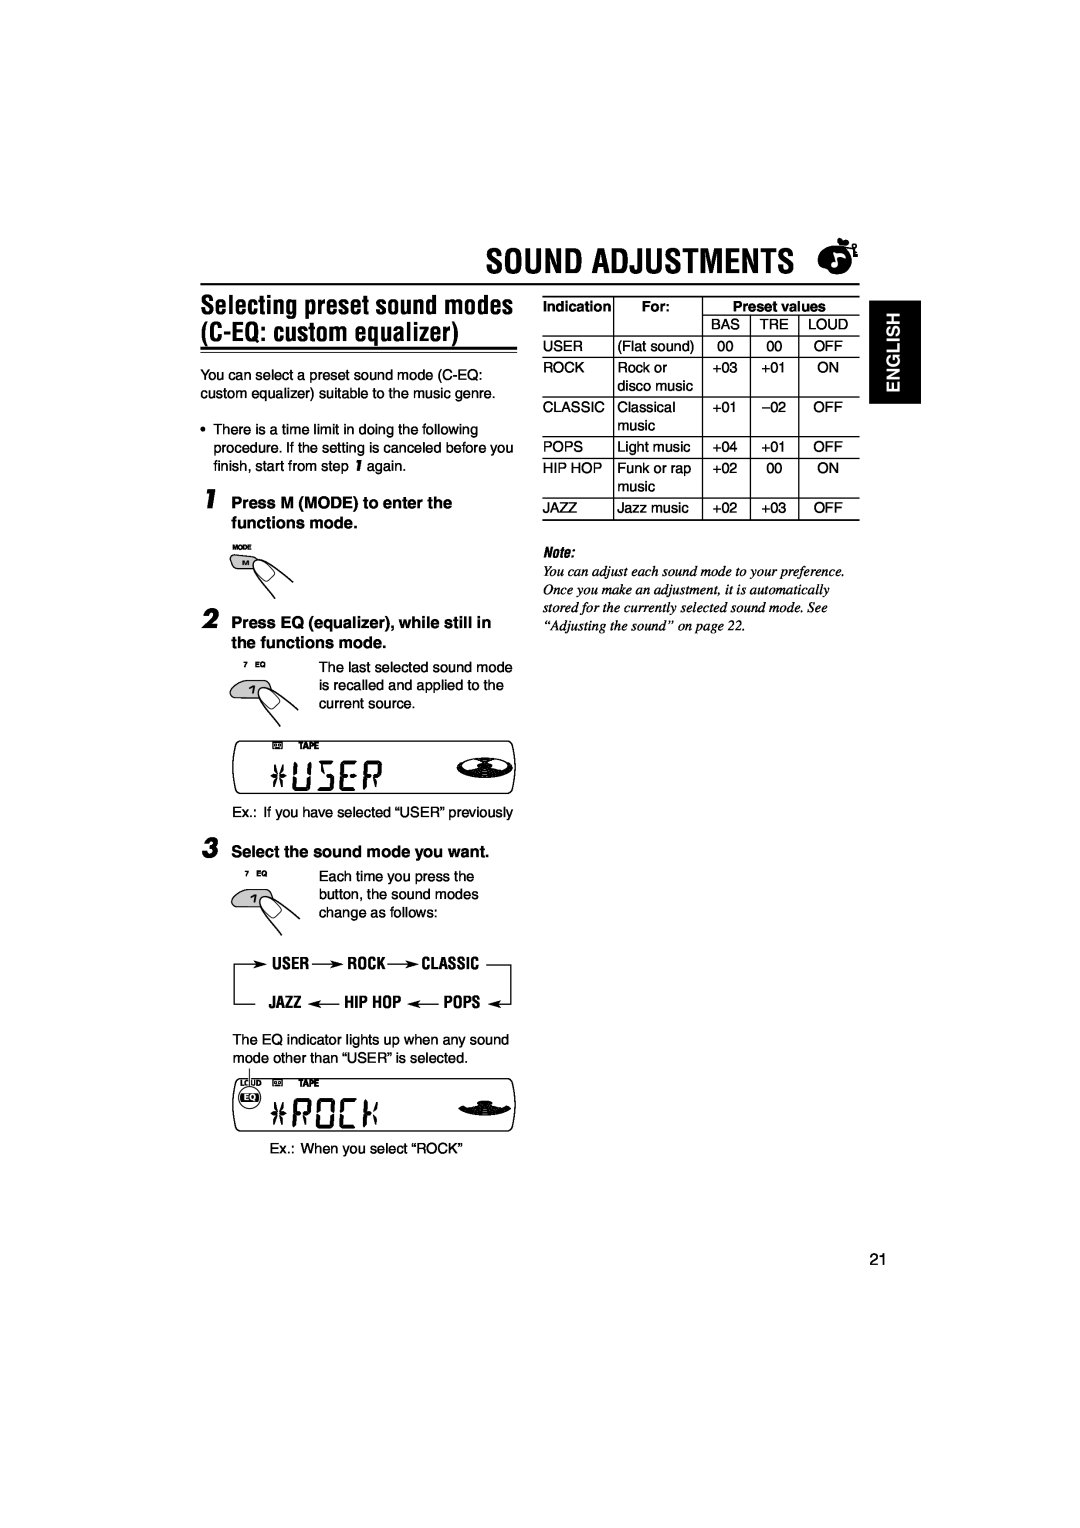 JVC KS-FX845R manual Sound Adjustments, English, Press M MODE to enter the functions mode, Select the sound mode you want 